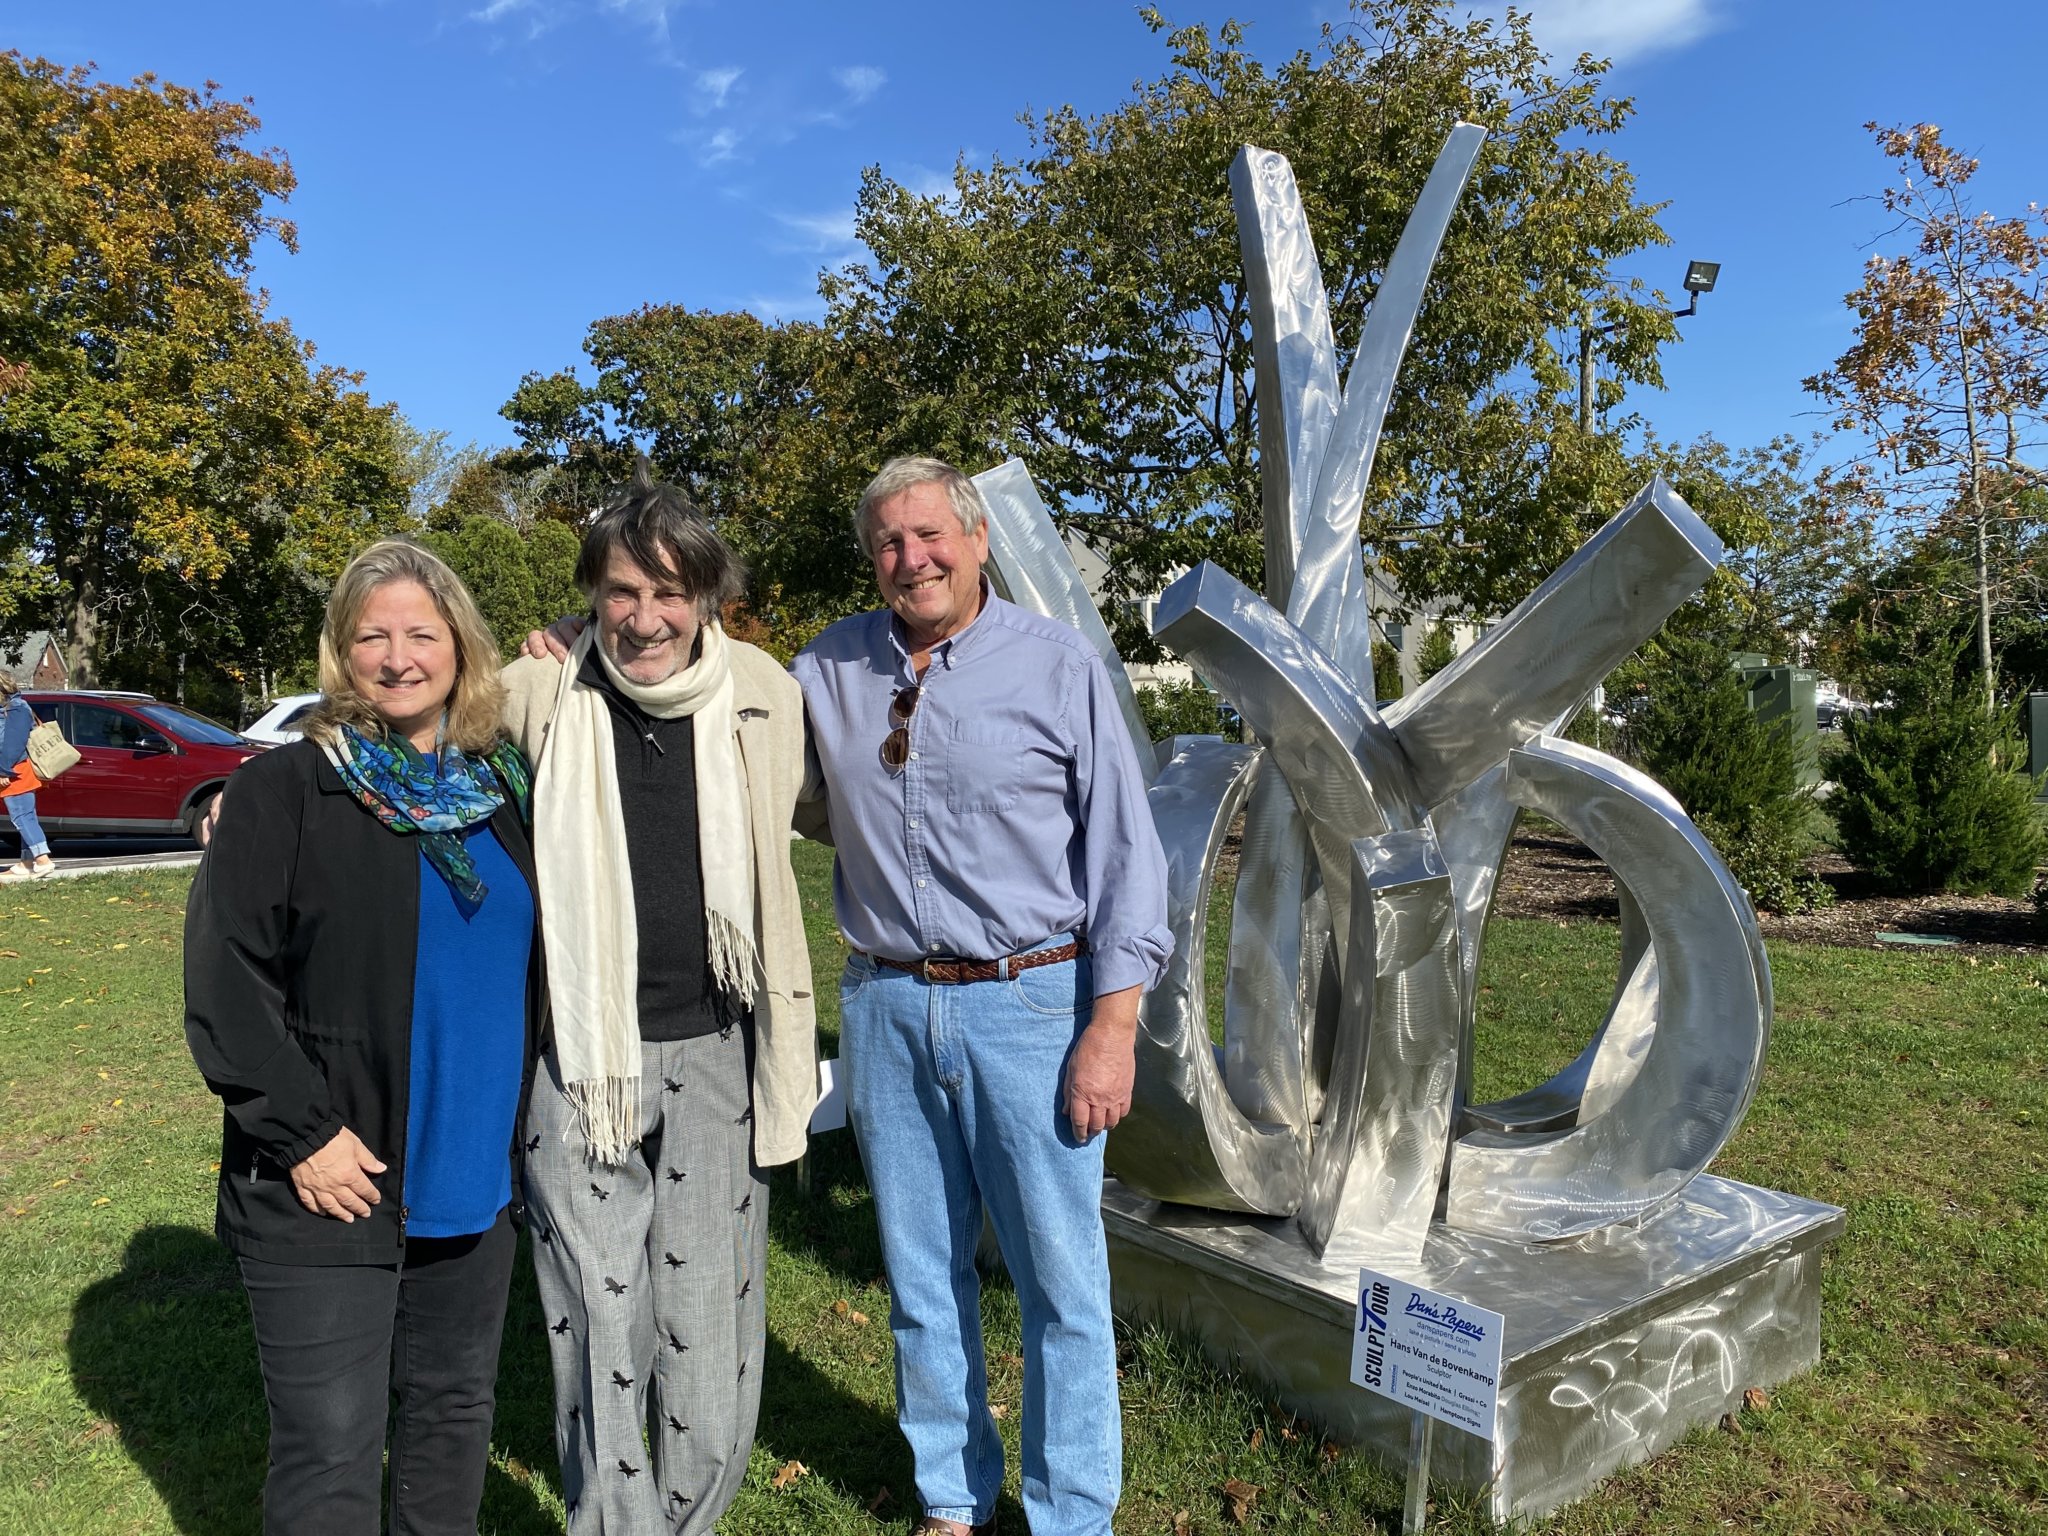 Westhampton Beach Mayor Maria Moore and Deputy Mayor Ralph Urban with Hans and one of his sculptures on The Great Lawn.